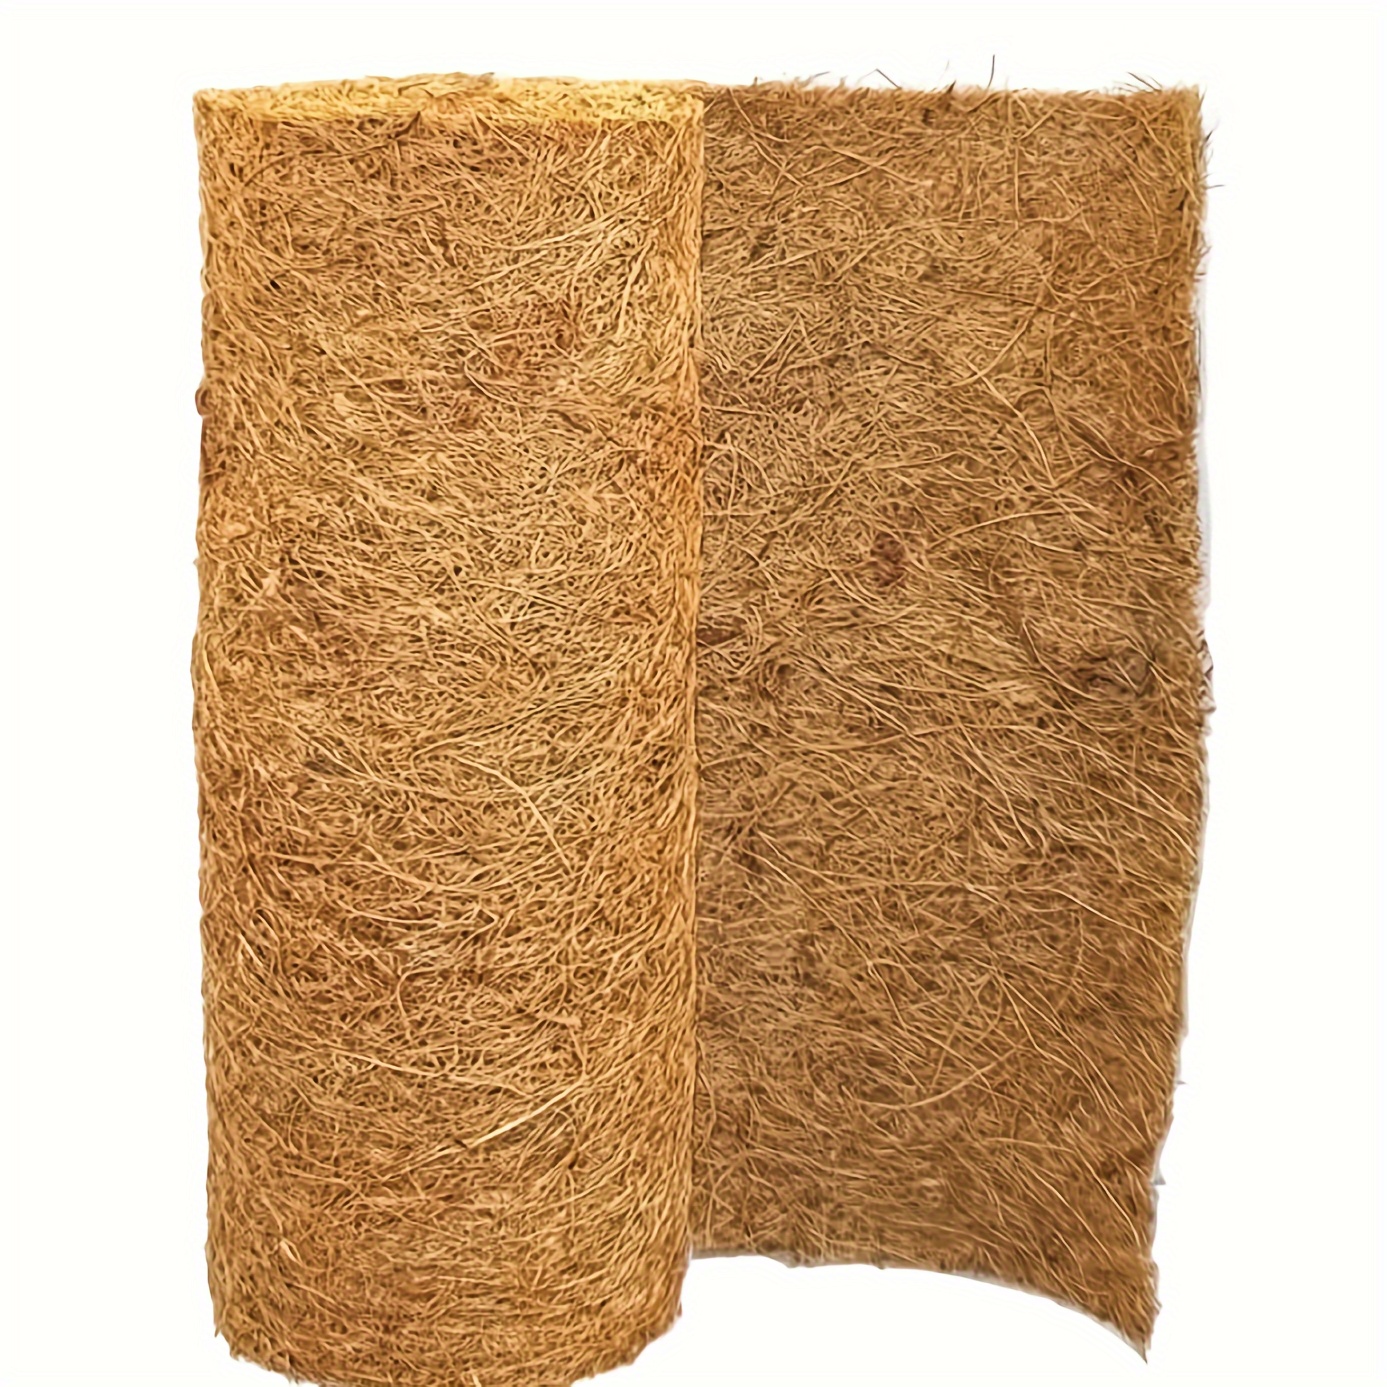 

1 Pack, Coco Liner Roll, 12 X 80 Inch/ 15.7 X 80 Inch Coconut Fiber Liners For Planter Window Box Flower Basket, Natural Coco Coir Sheet Coco Mats For Animal Pet Pad, Reptile Carpet, Garden Decoration